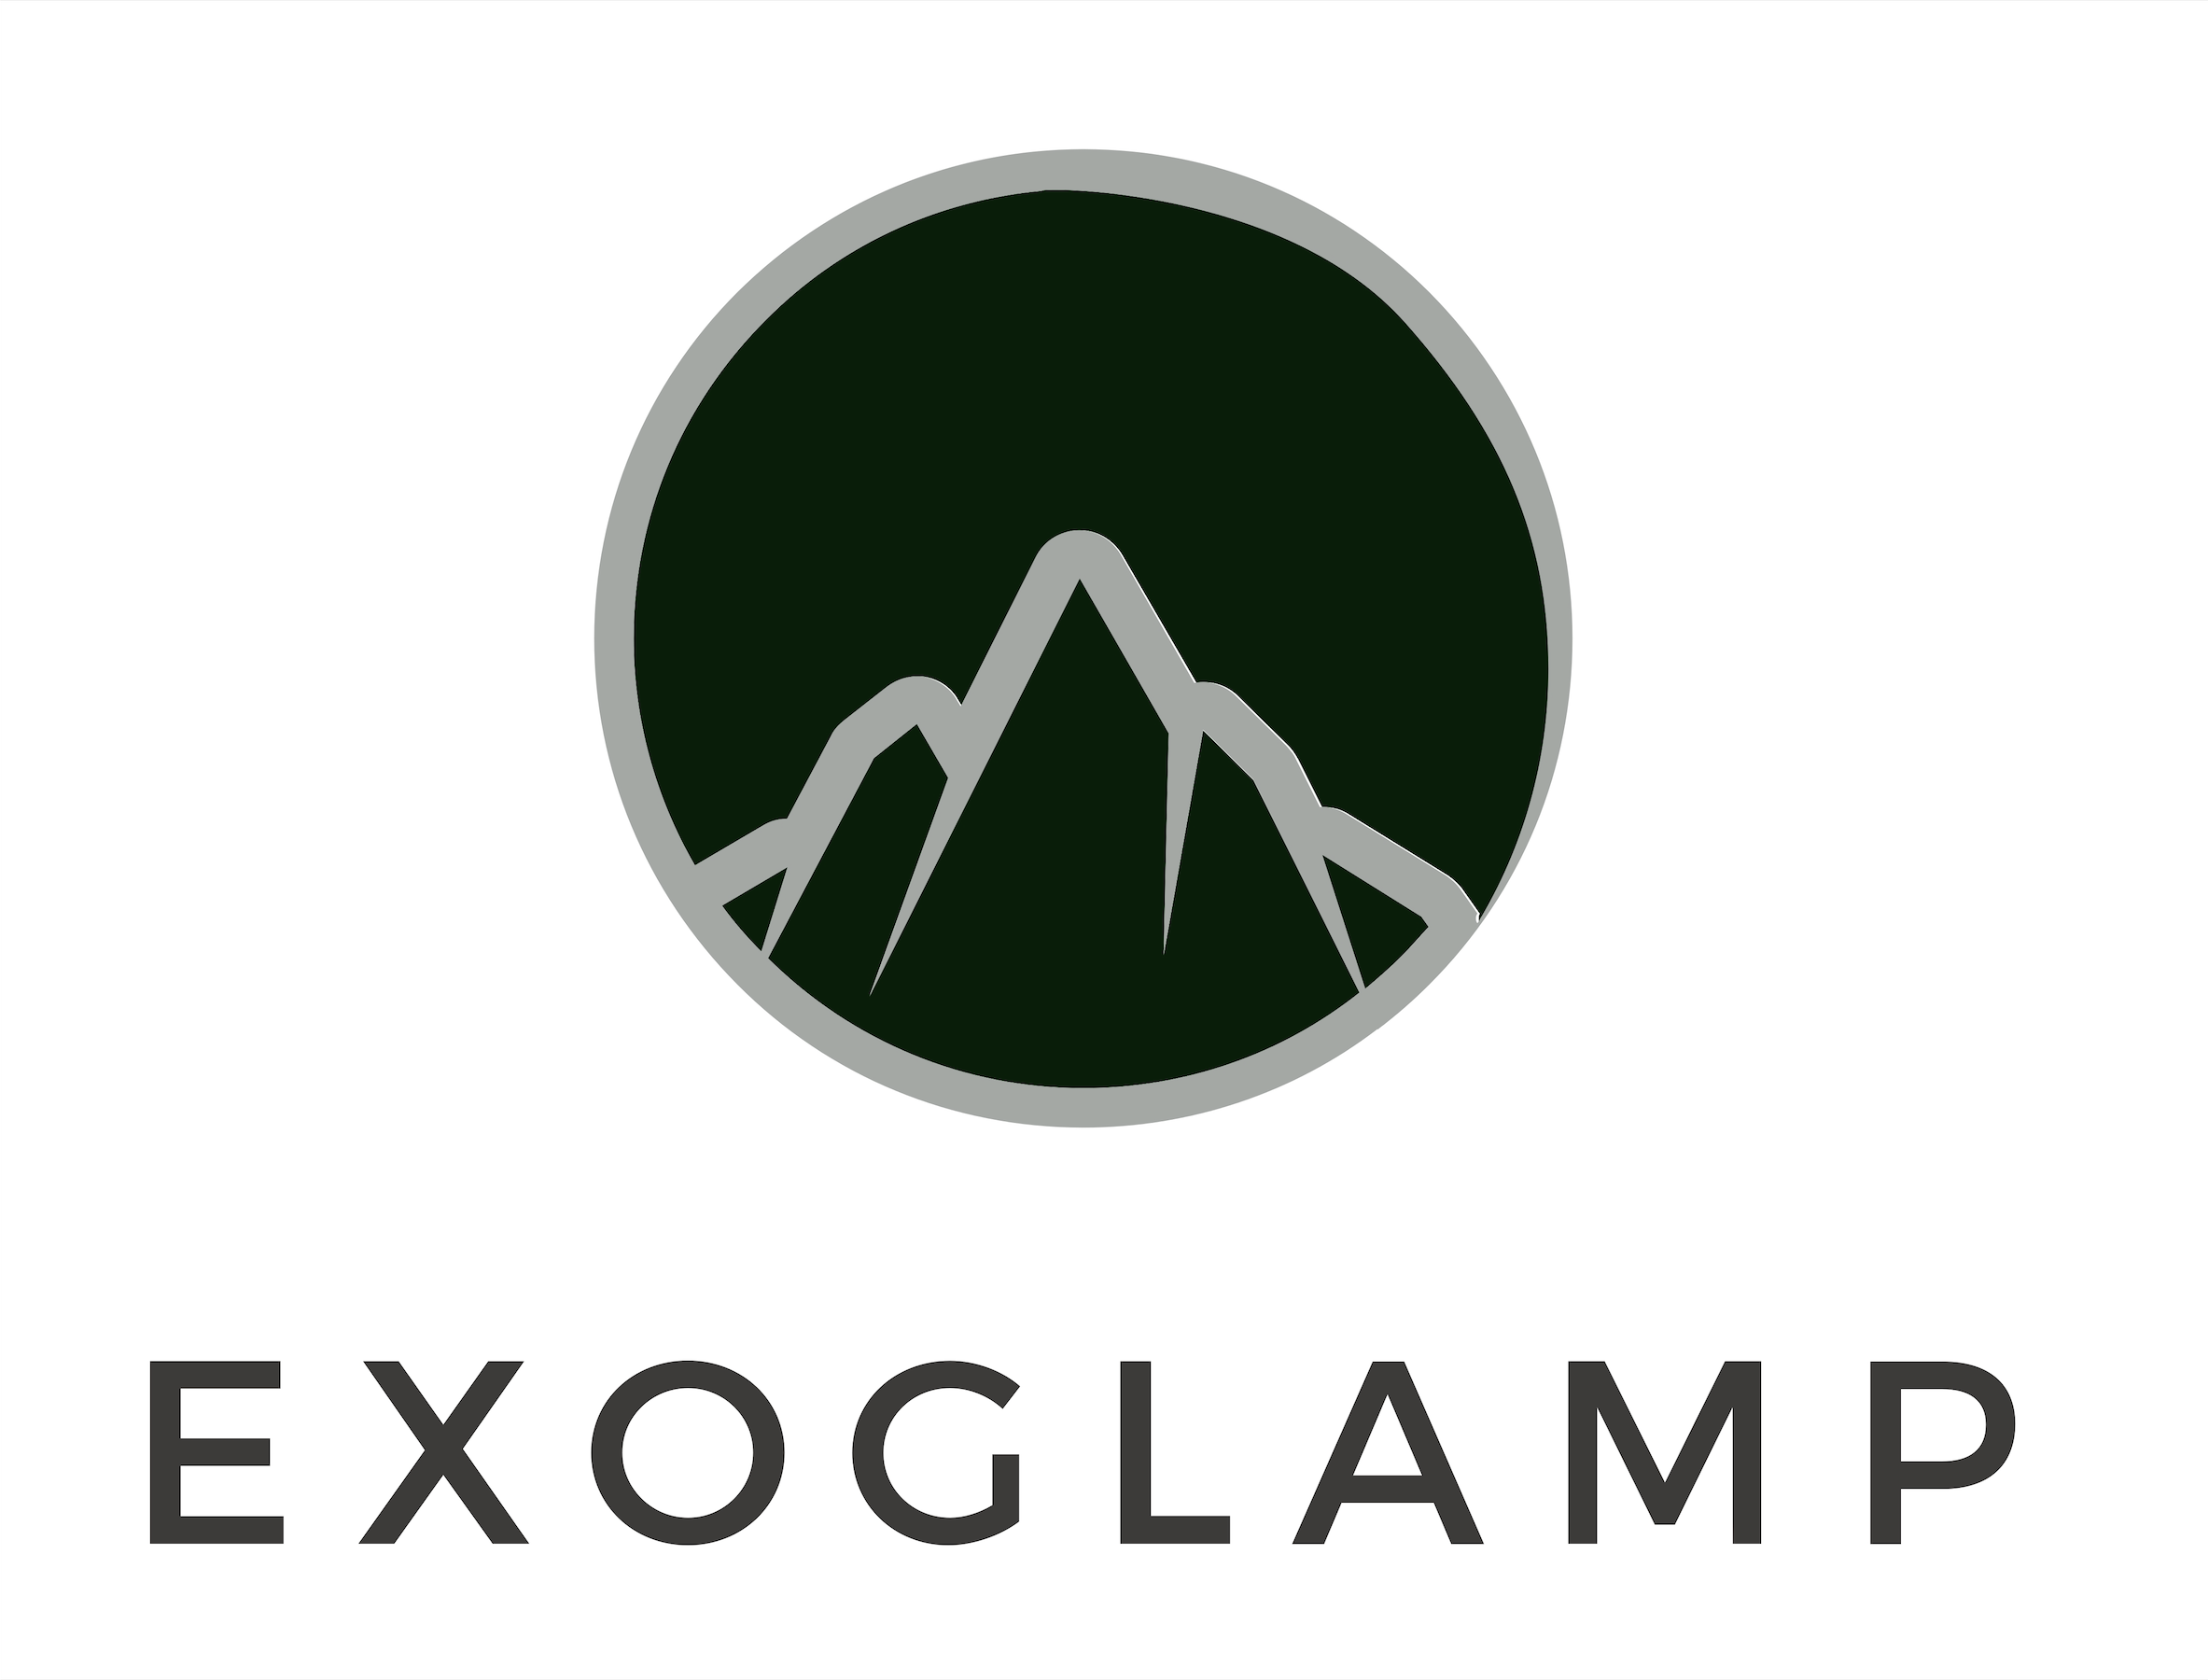 Exo Glamp Oy - Glamping tents, chairs and tables from the online store